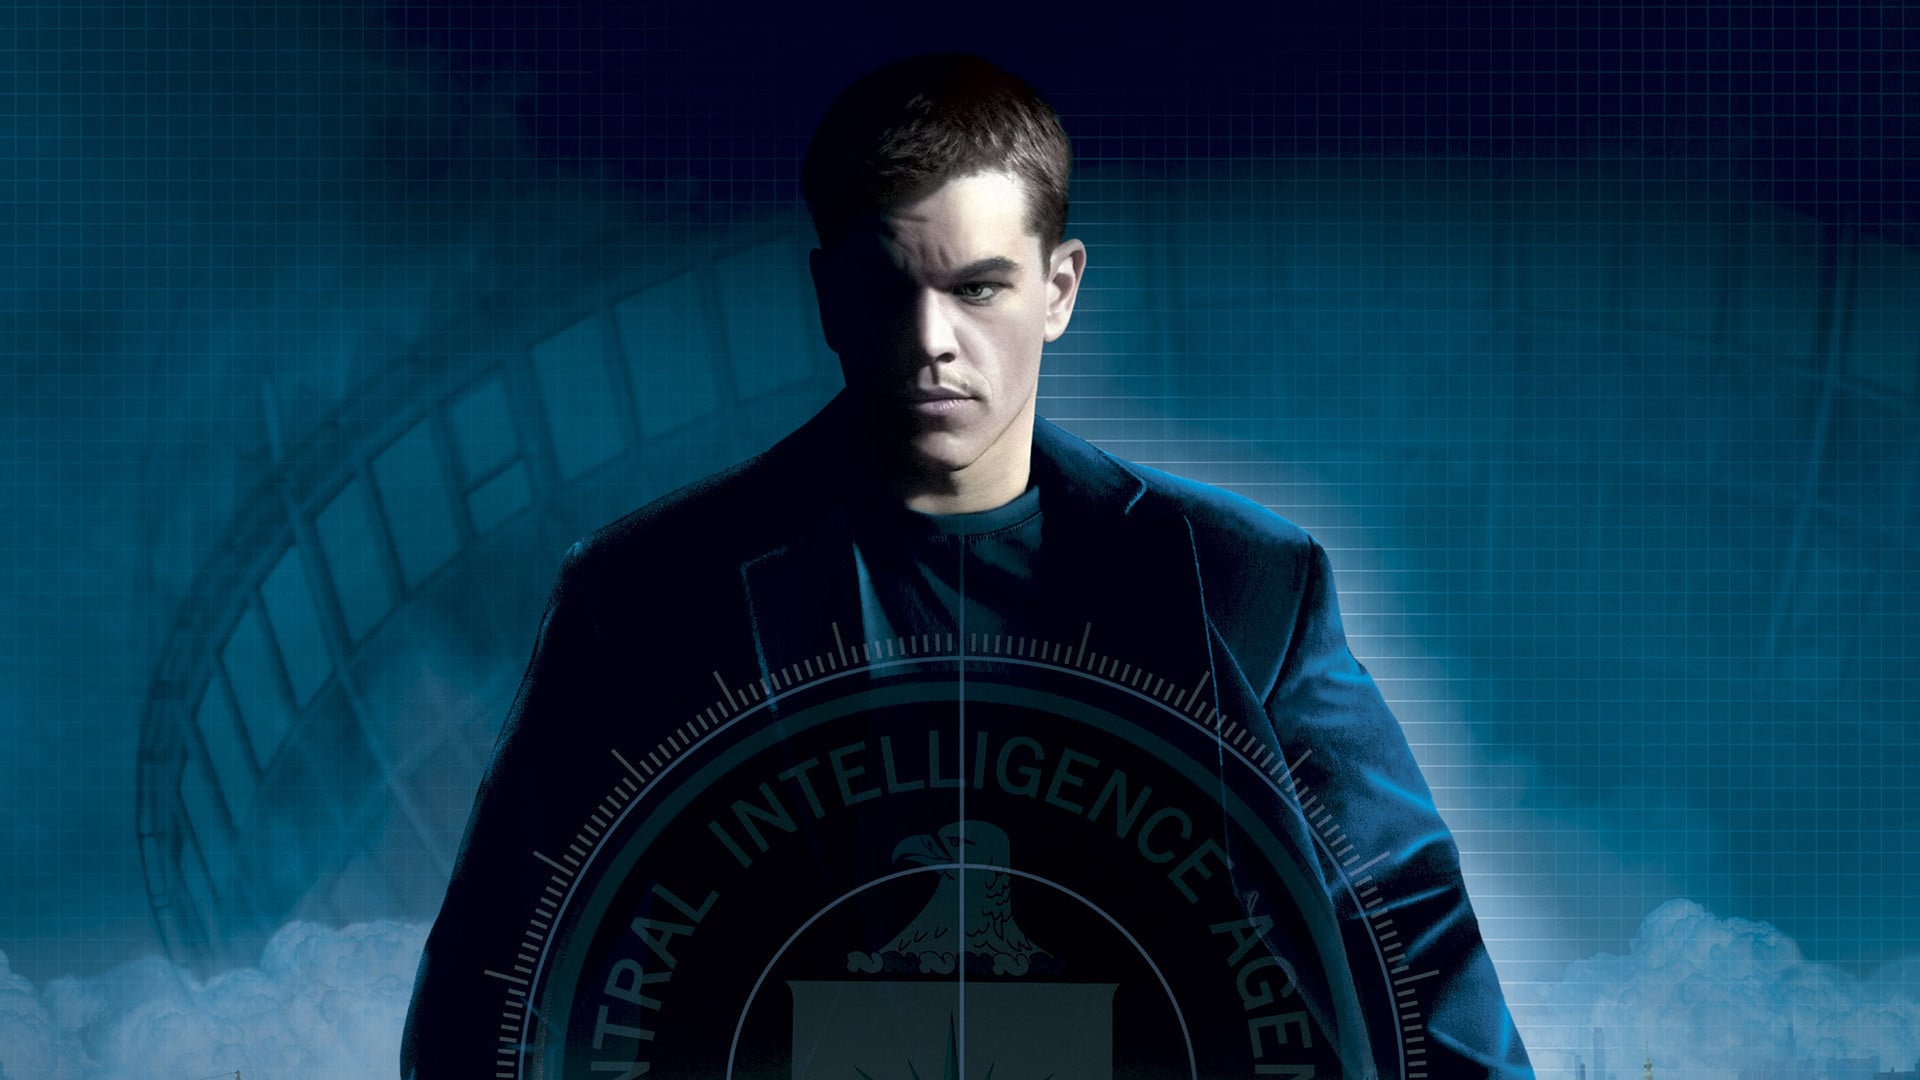 list of jason bourne movies in order